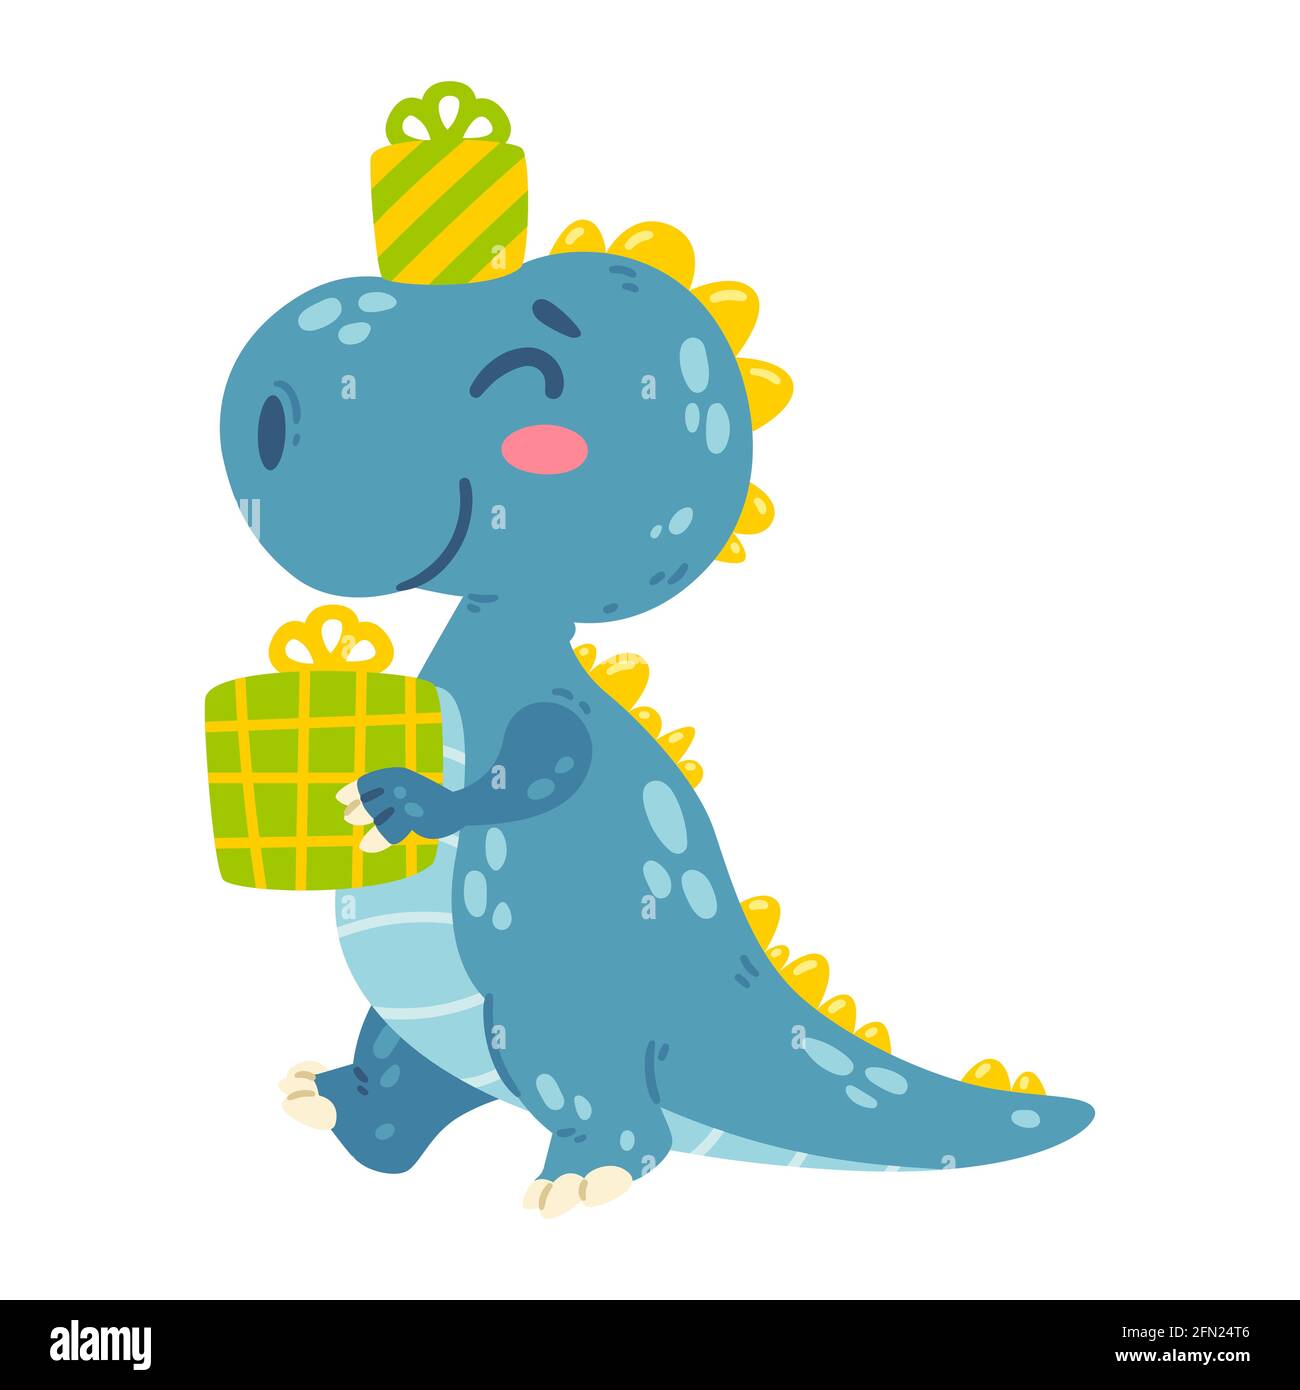 Cute little dinosaur carries gifts. Dragon goes to the happy birthday party with presents. Character for the design of posters, postcards, clothing. P Stock Vector